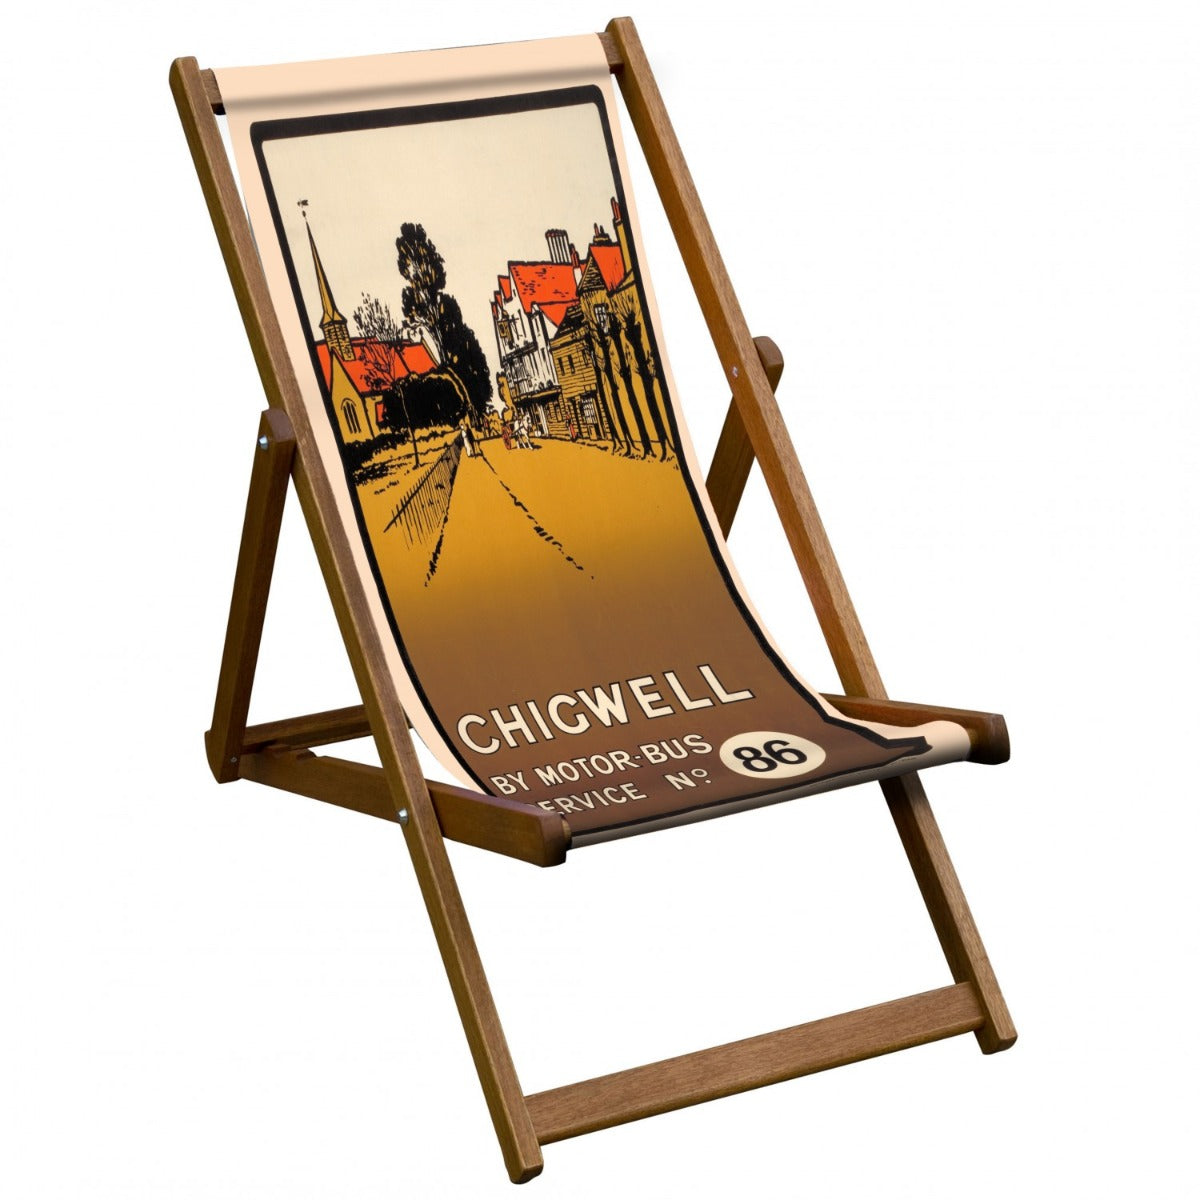 Vintage Inspired Wooden Deckchair- Chigwell- National Railway Museum Poster